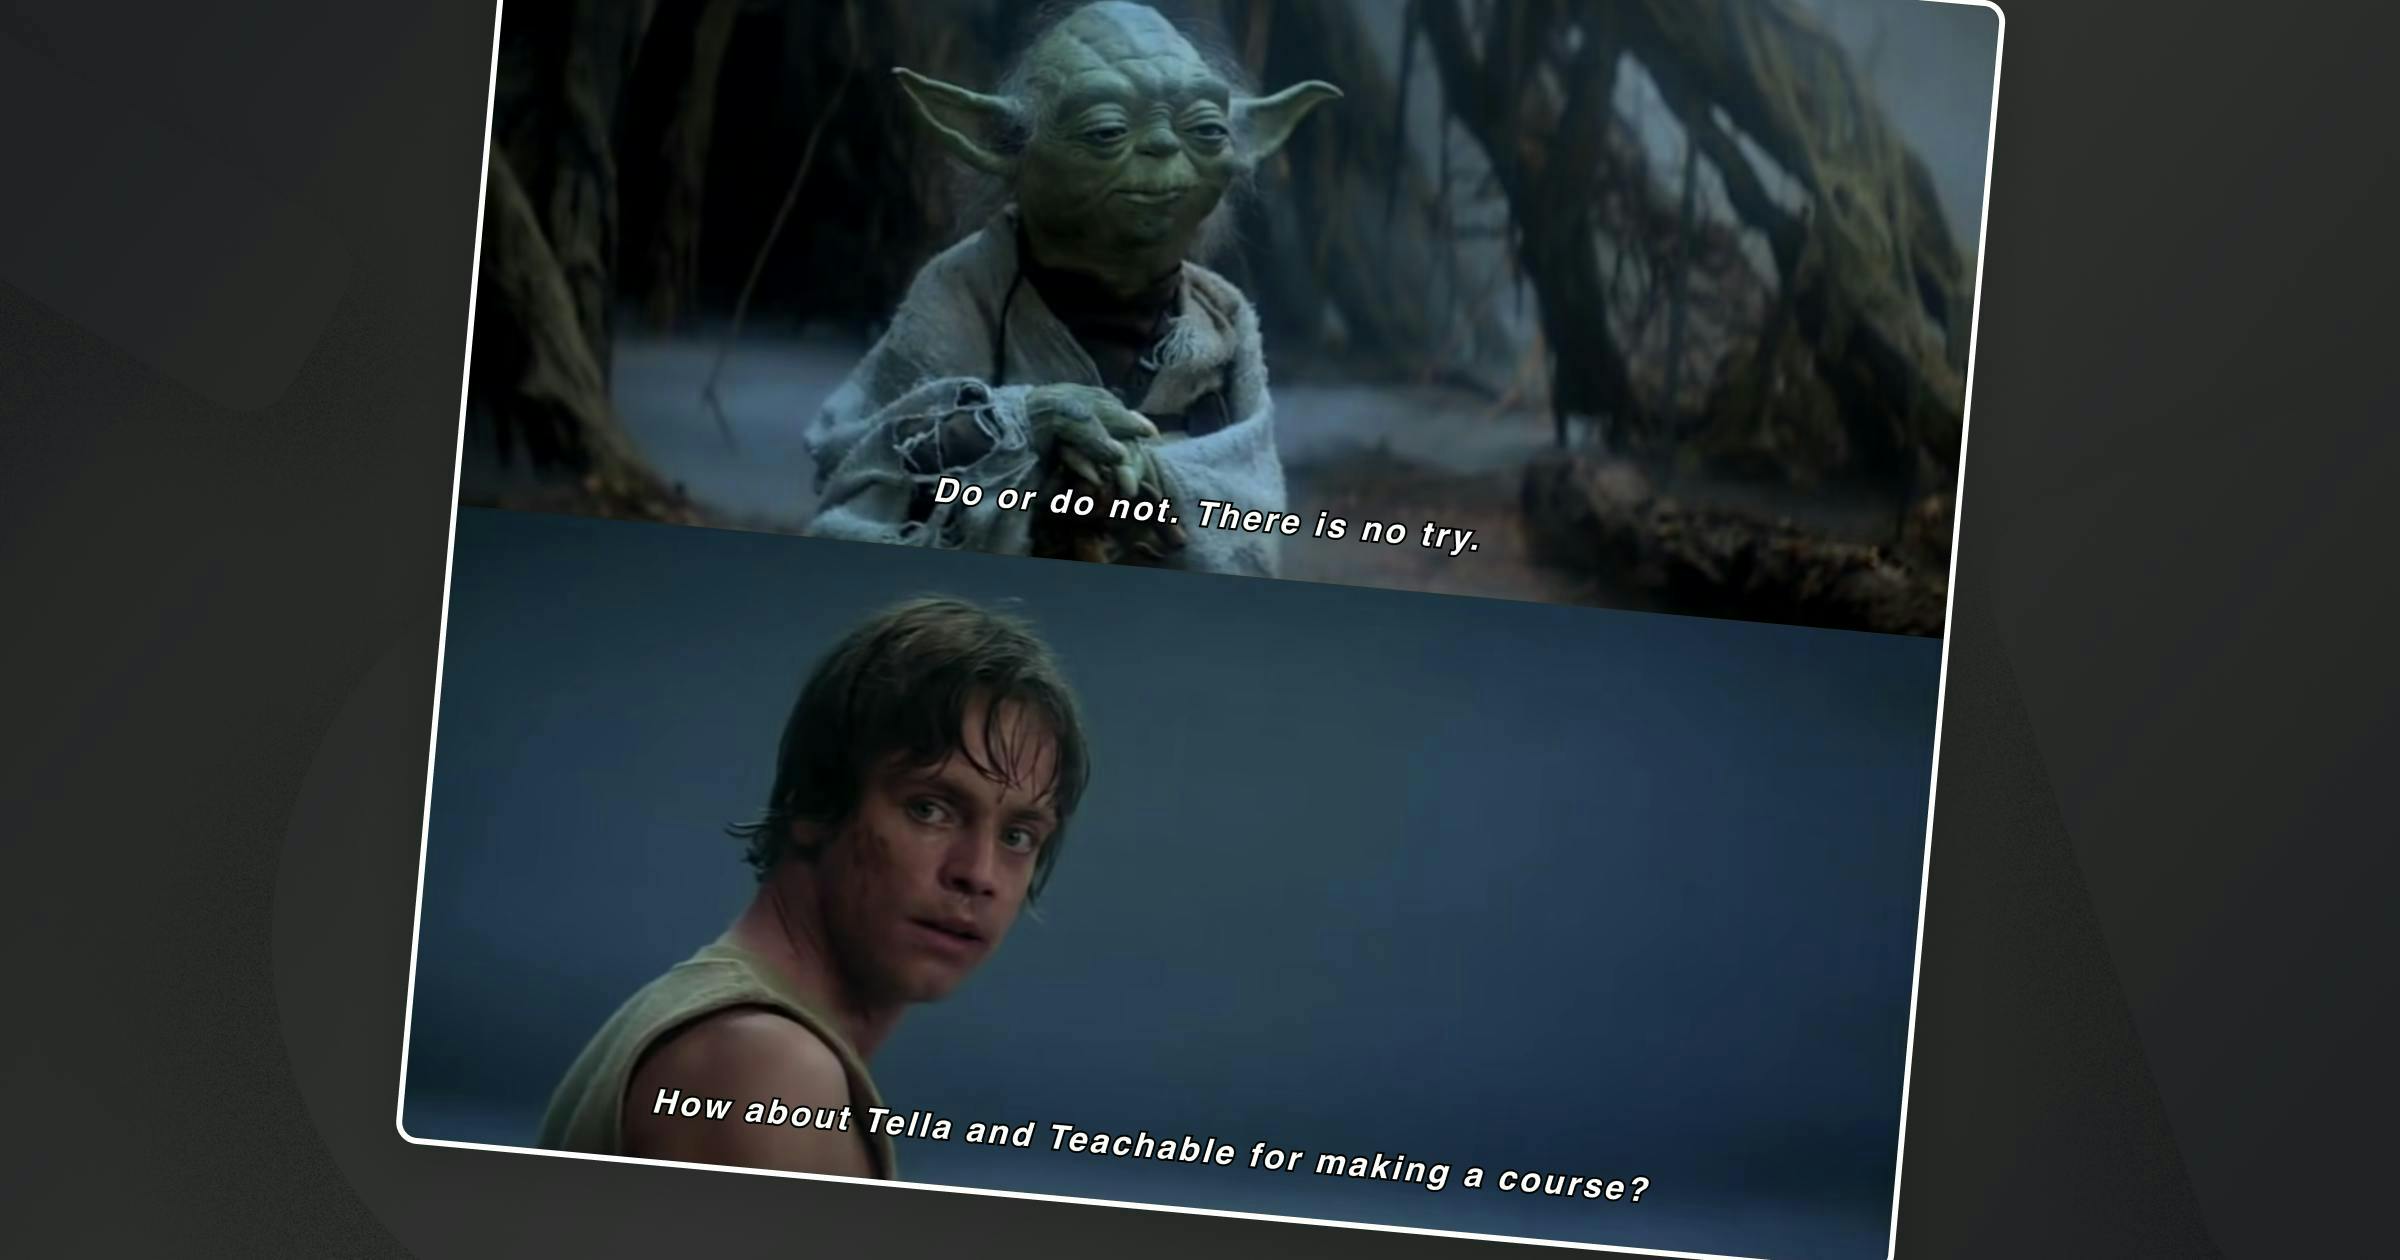 Image of Yoda and Luke Skywalker having a conversation about creating a course on Teachable using Tella.